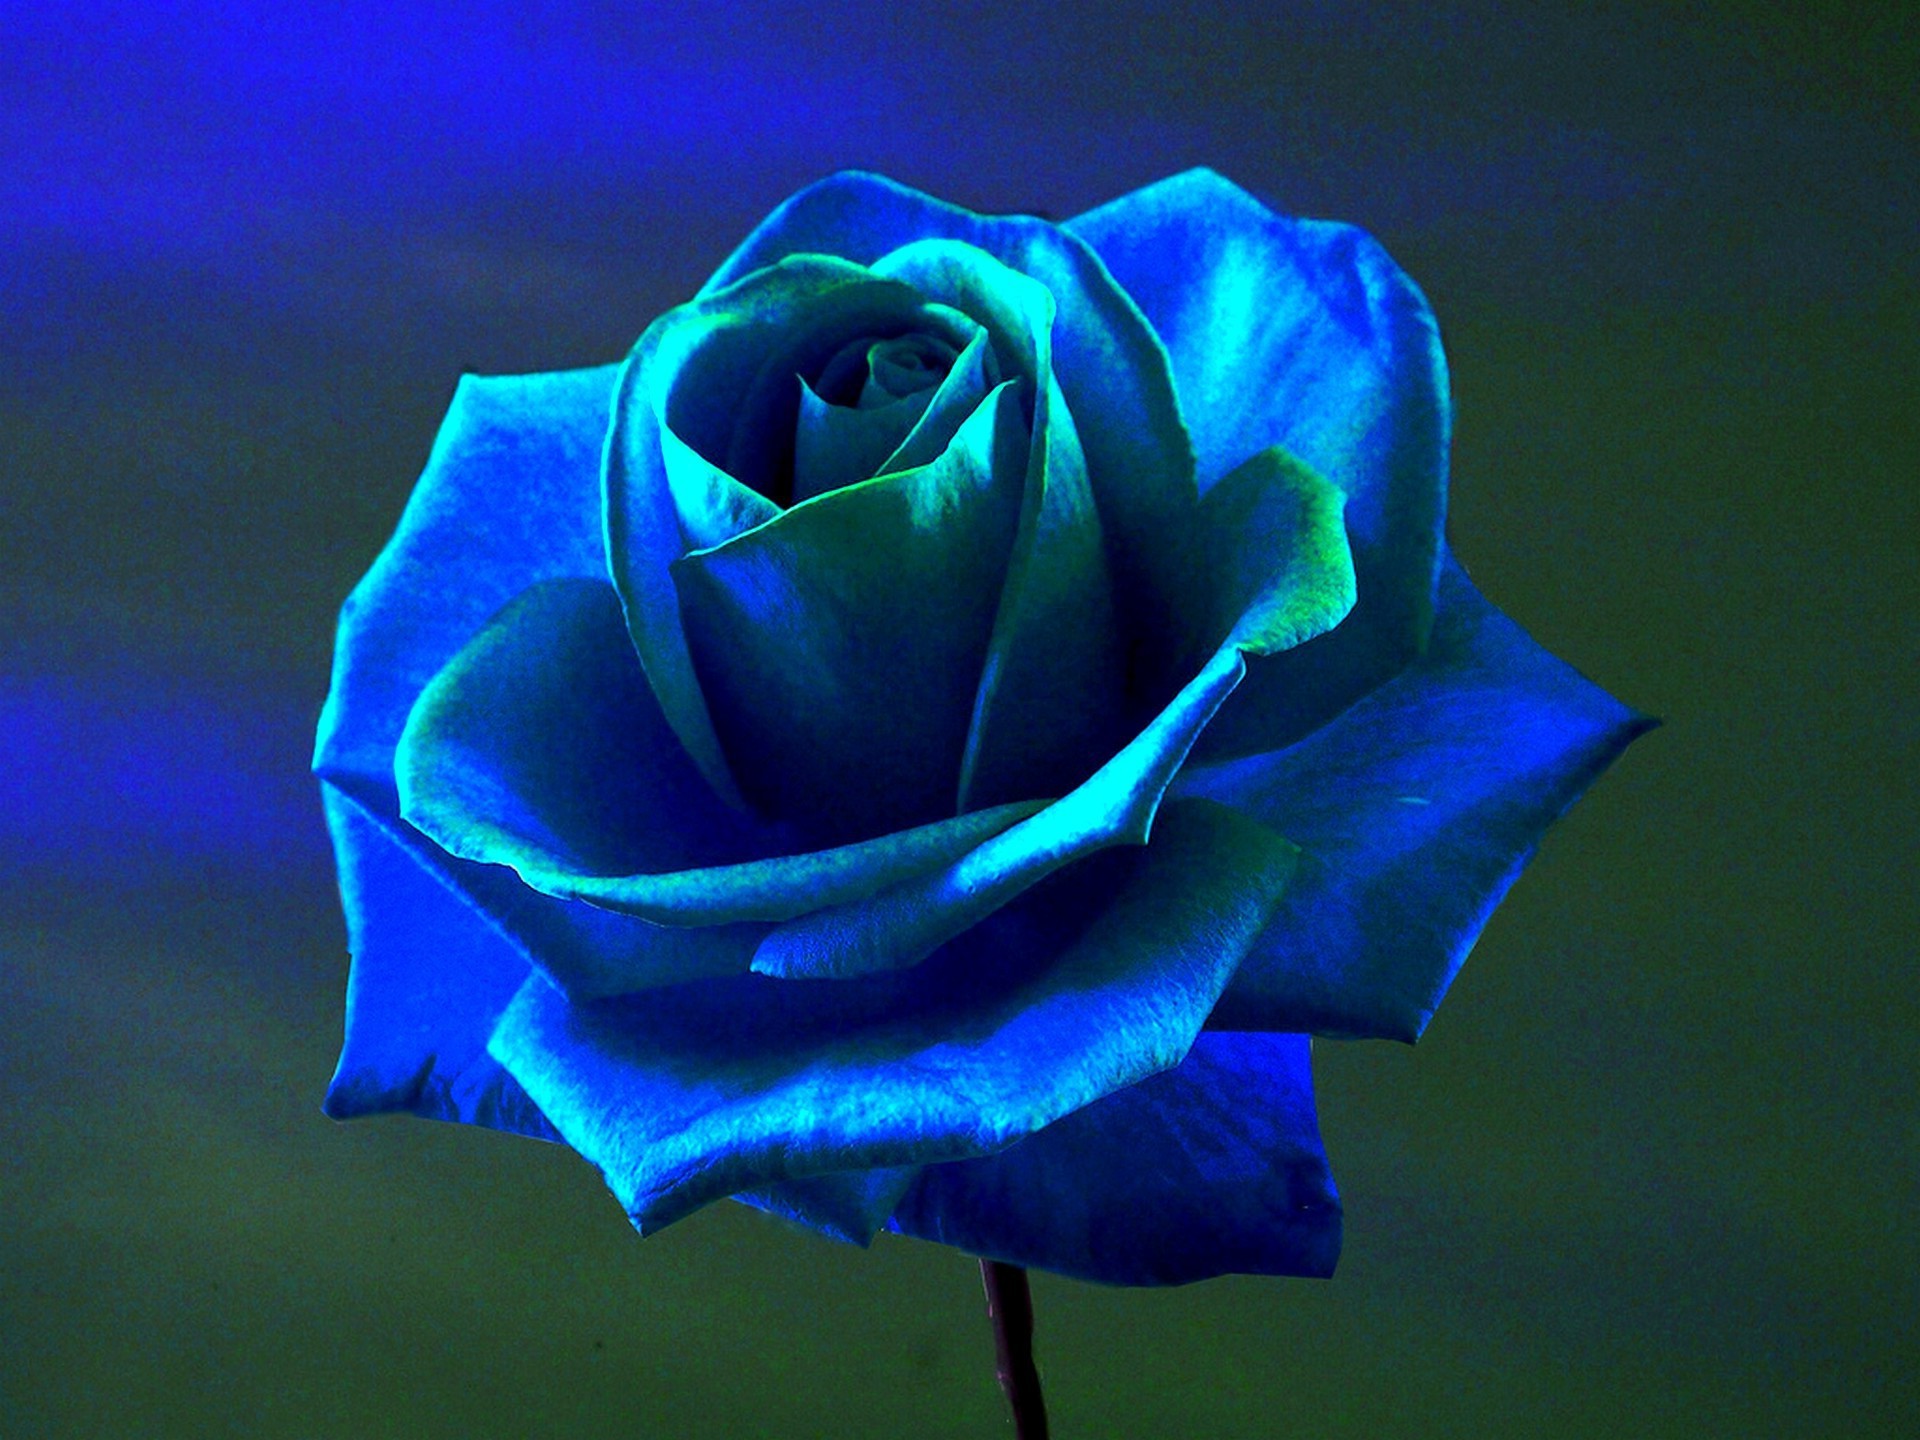 Blue Rose Wallpaper Image Photos Pictures Background